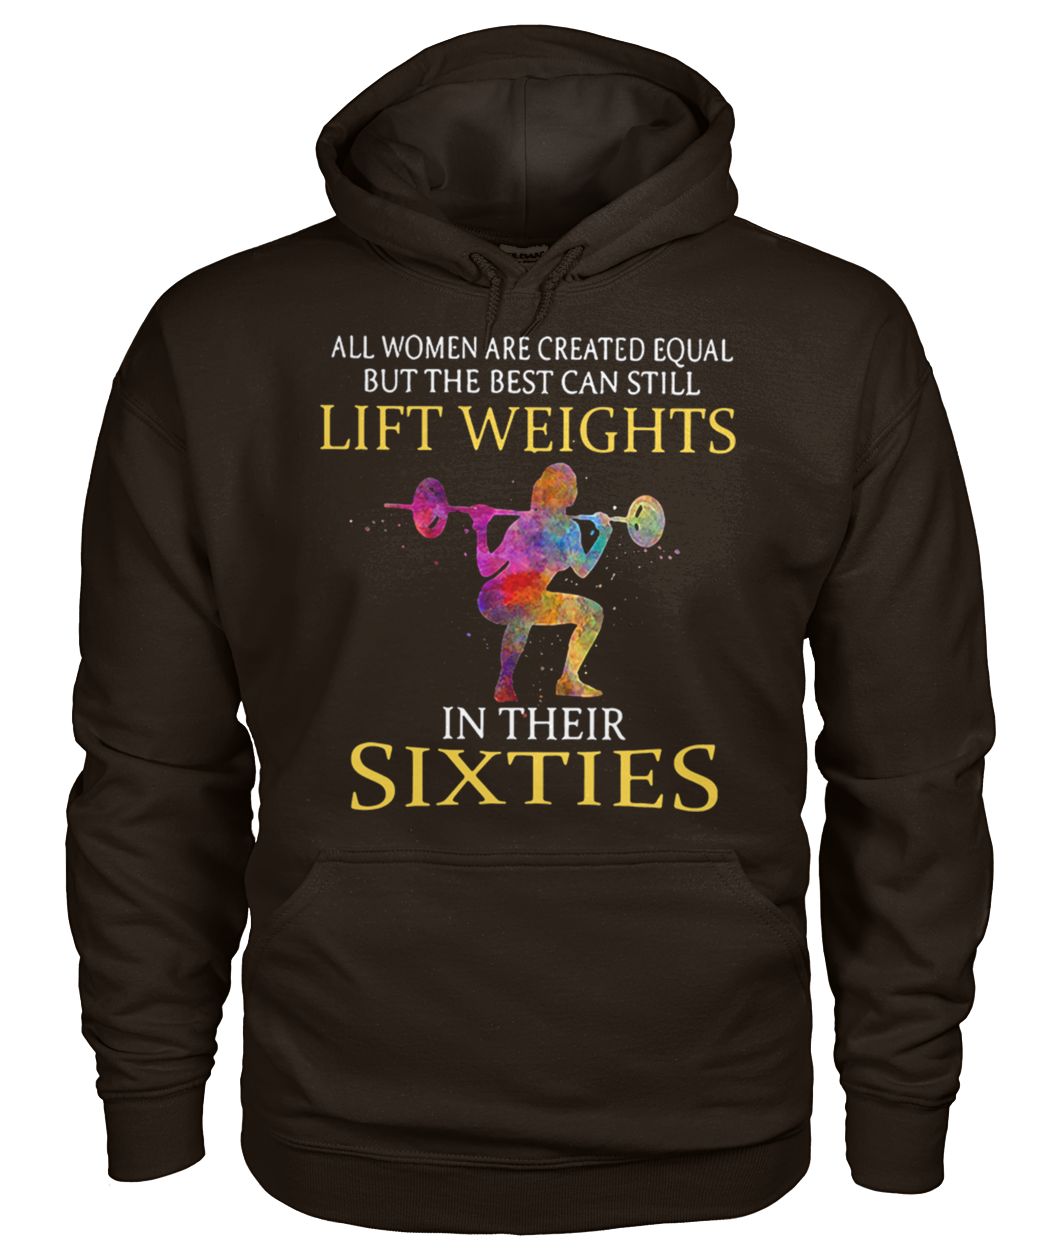 All women are created equal but the best can still lift weights in their sixties gildan hoodie